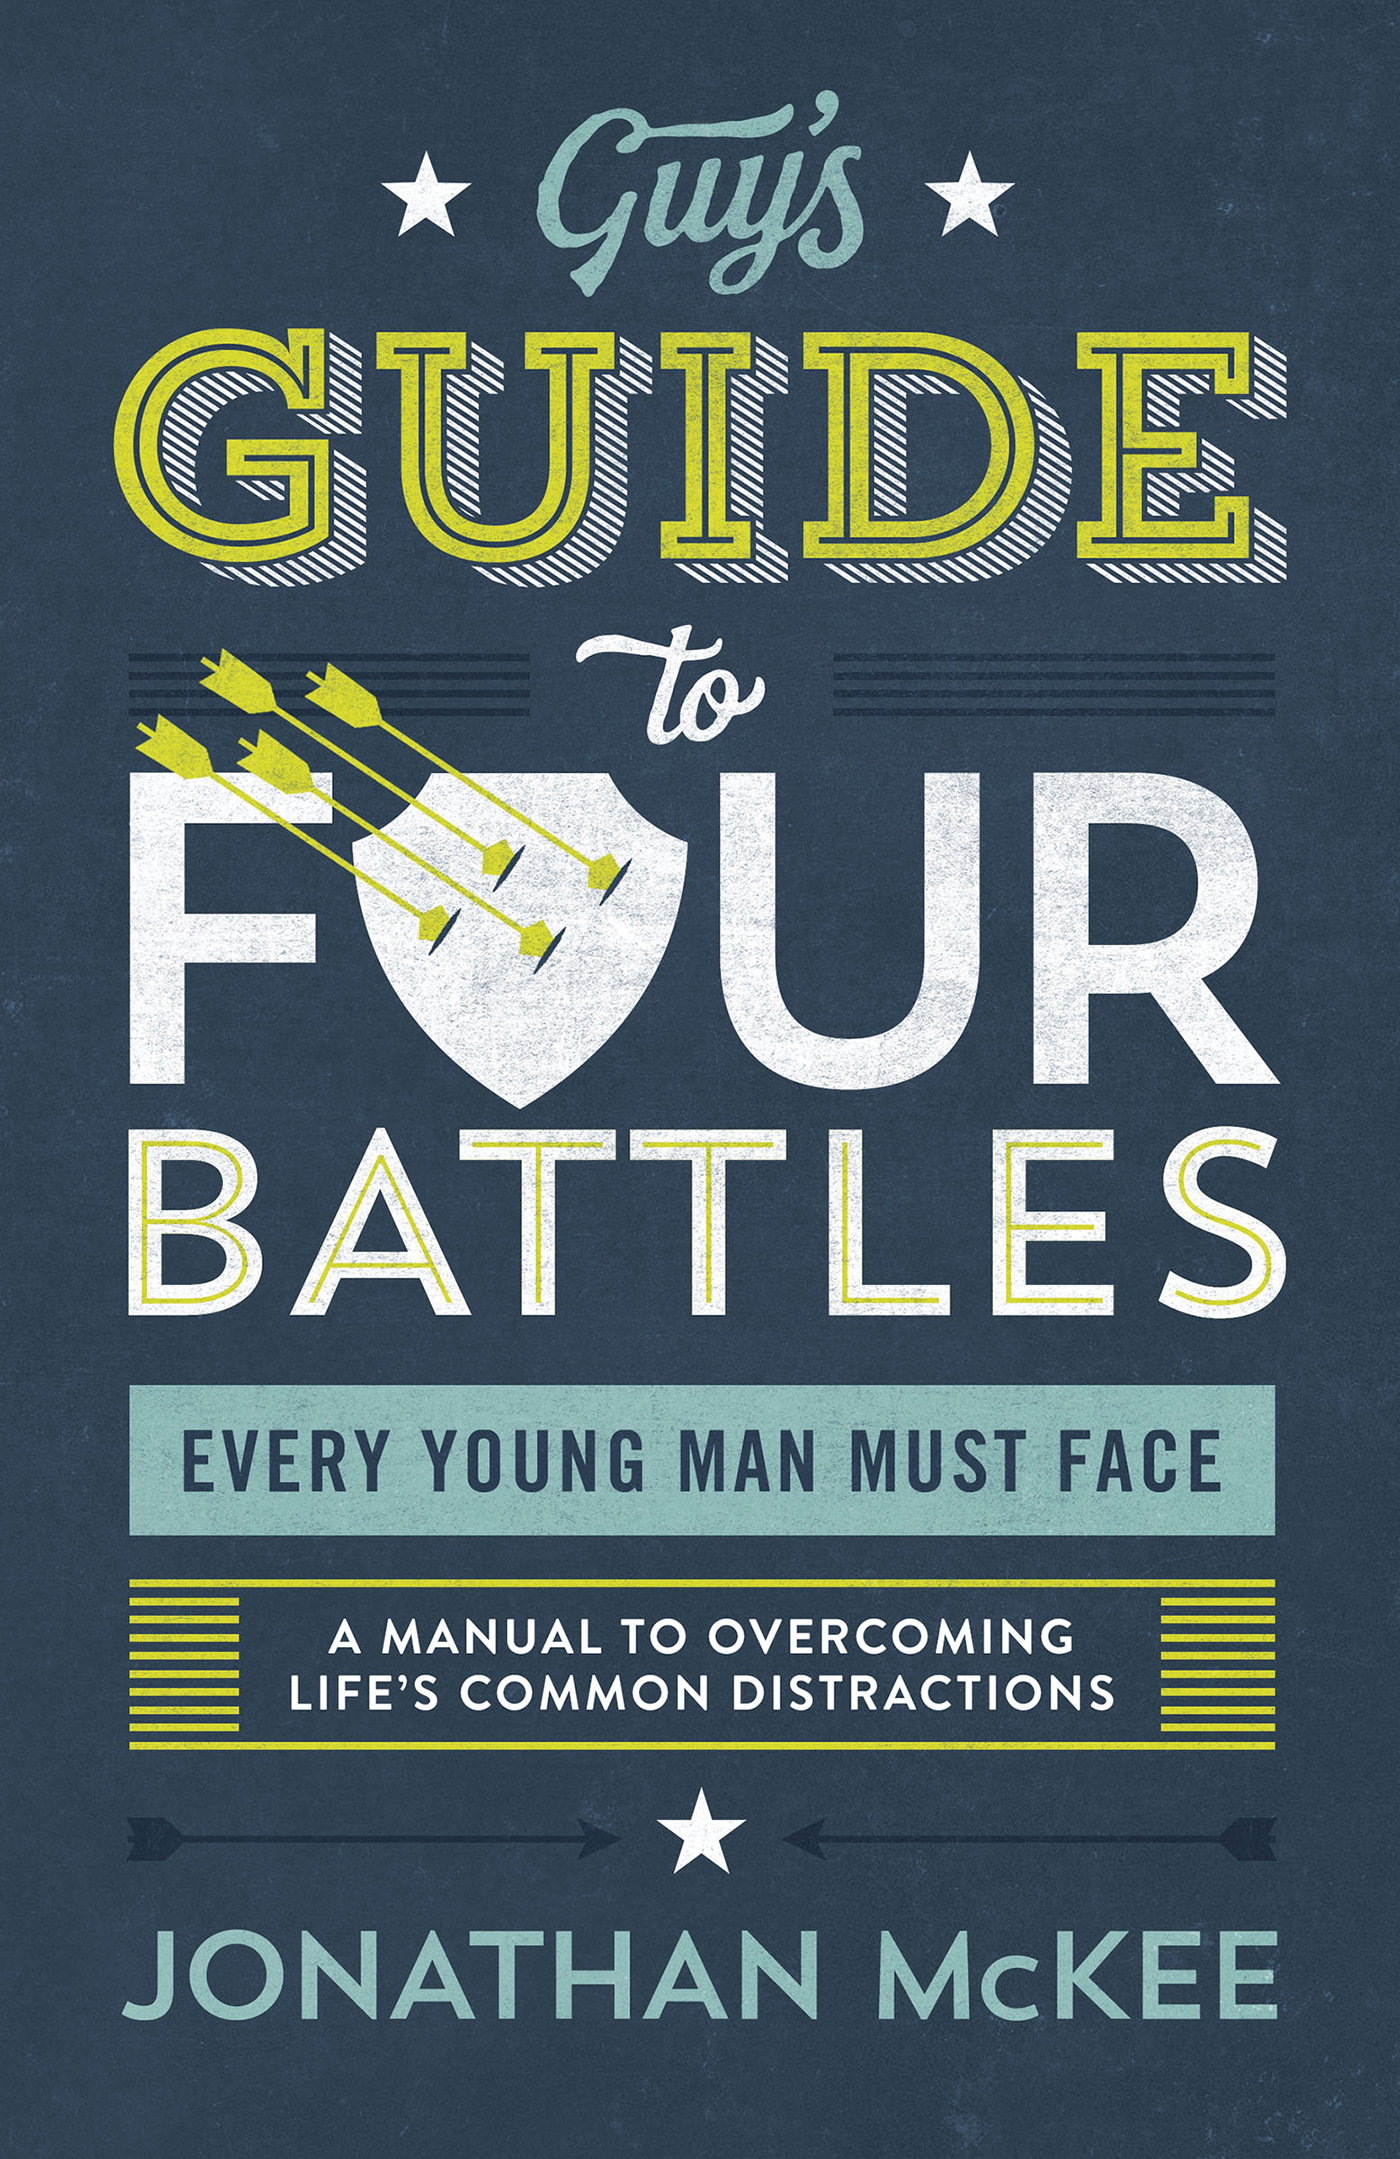 The Guy's Guide to Four Battles Every Young Man Must Face : a manual to overcoming life’s common distractions (Paperback) - image 2 of 6